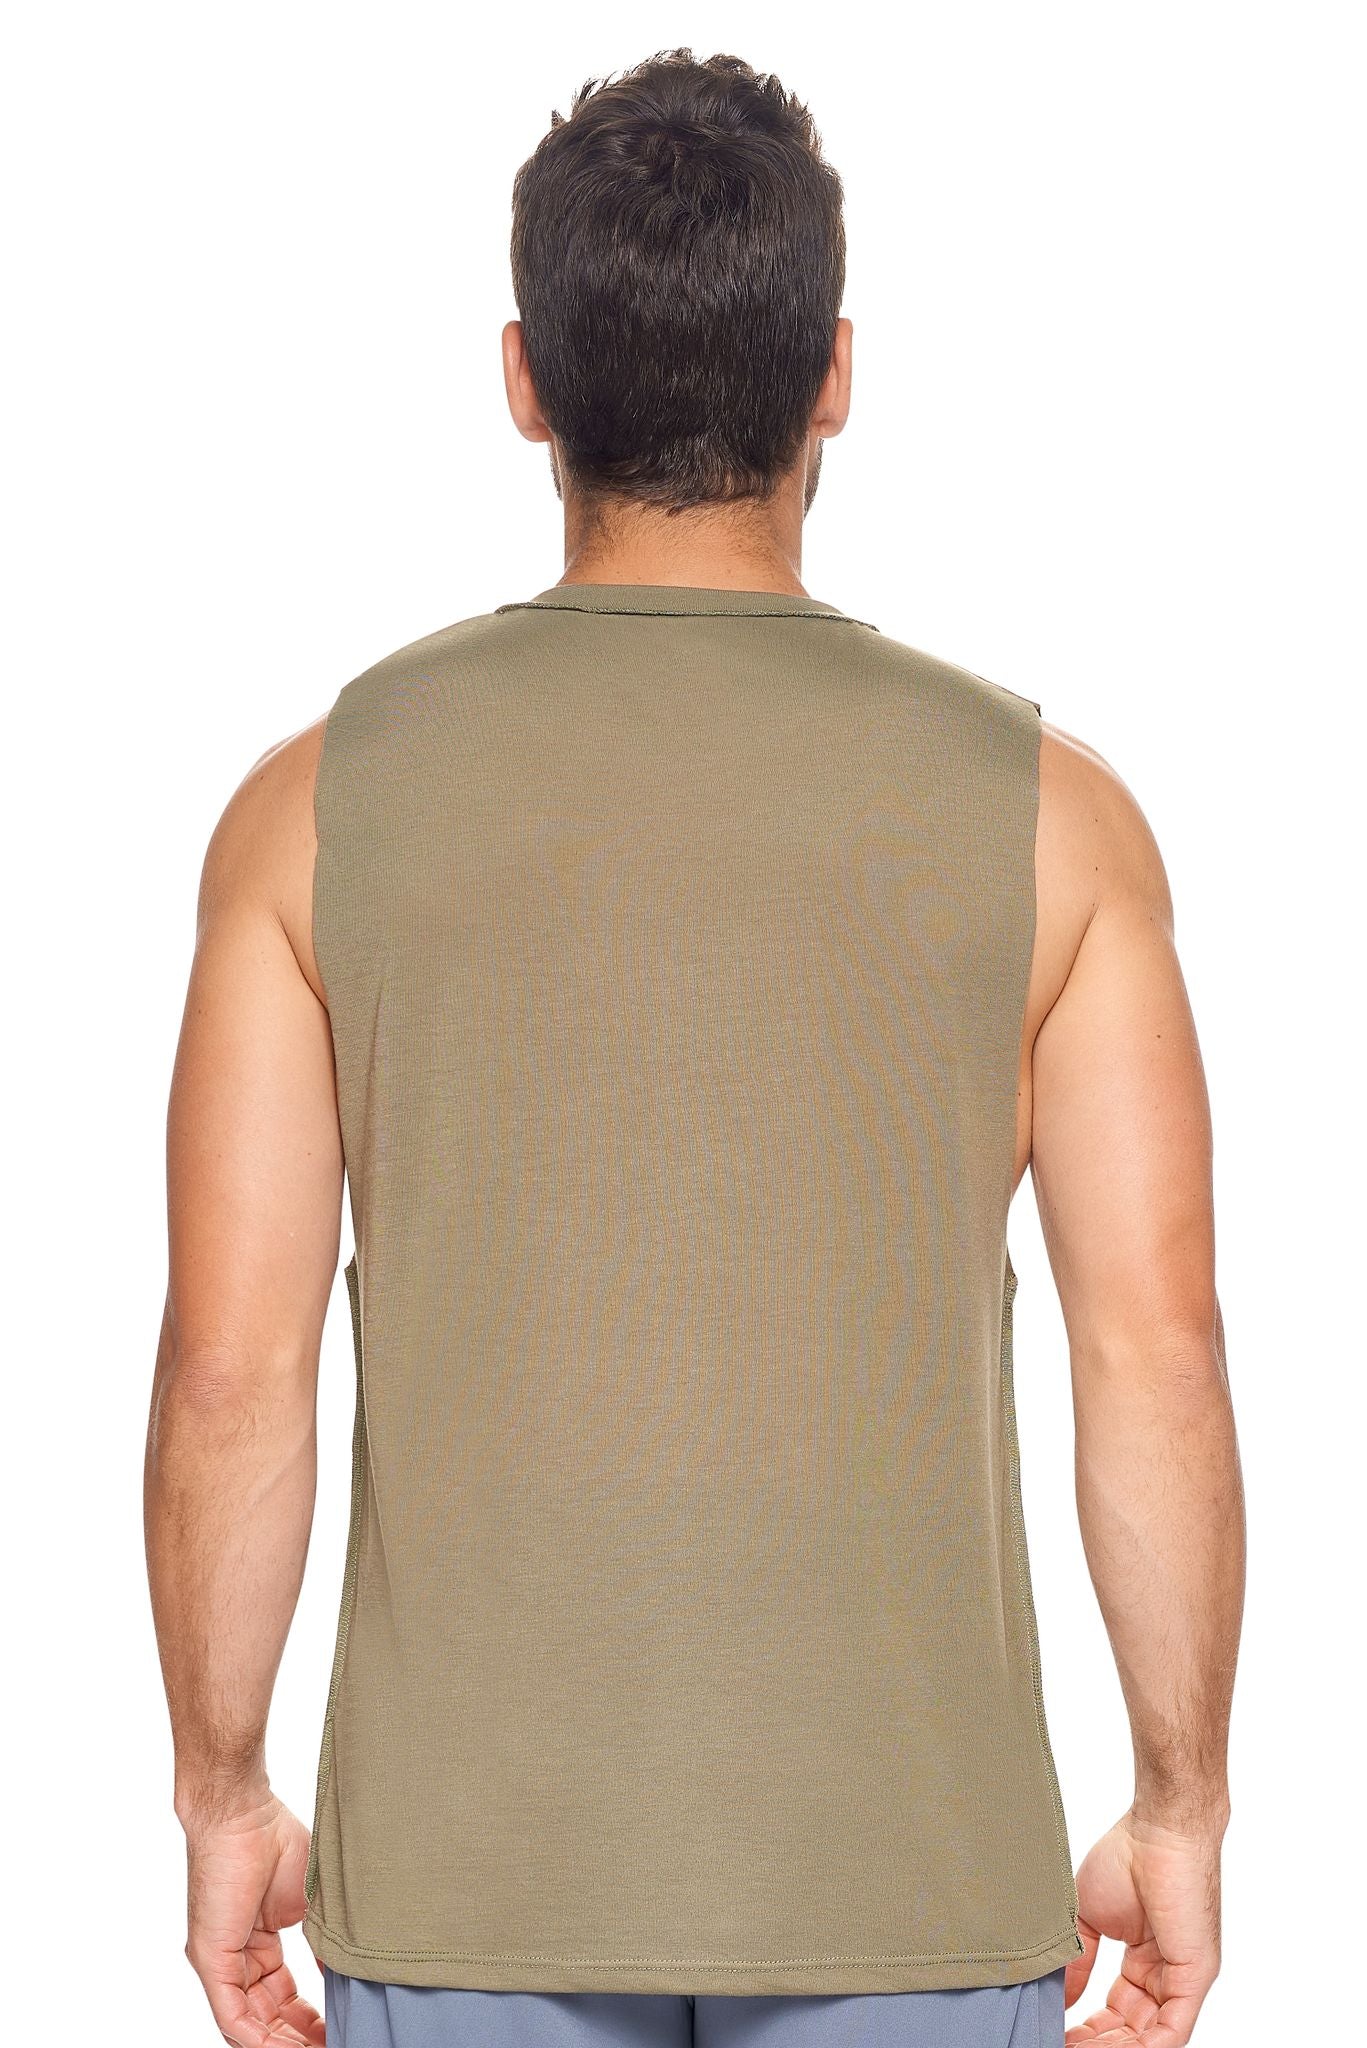 Expert Brand Wholesale Men's Siro™ Raw Edge Muscle Tee in Olive Image 3#olive